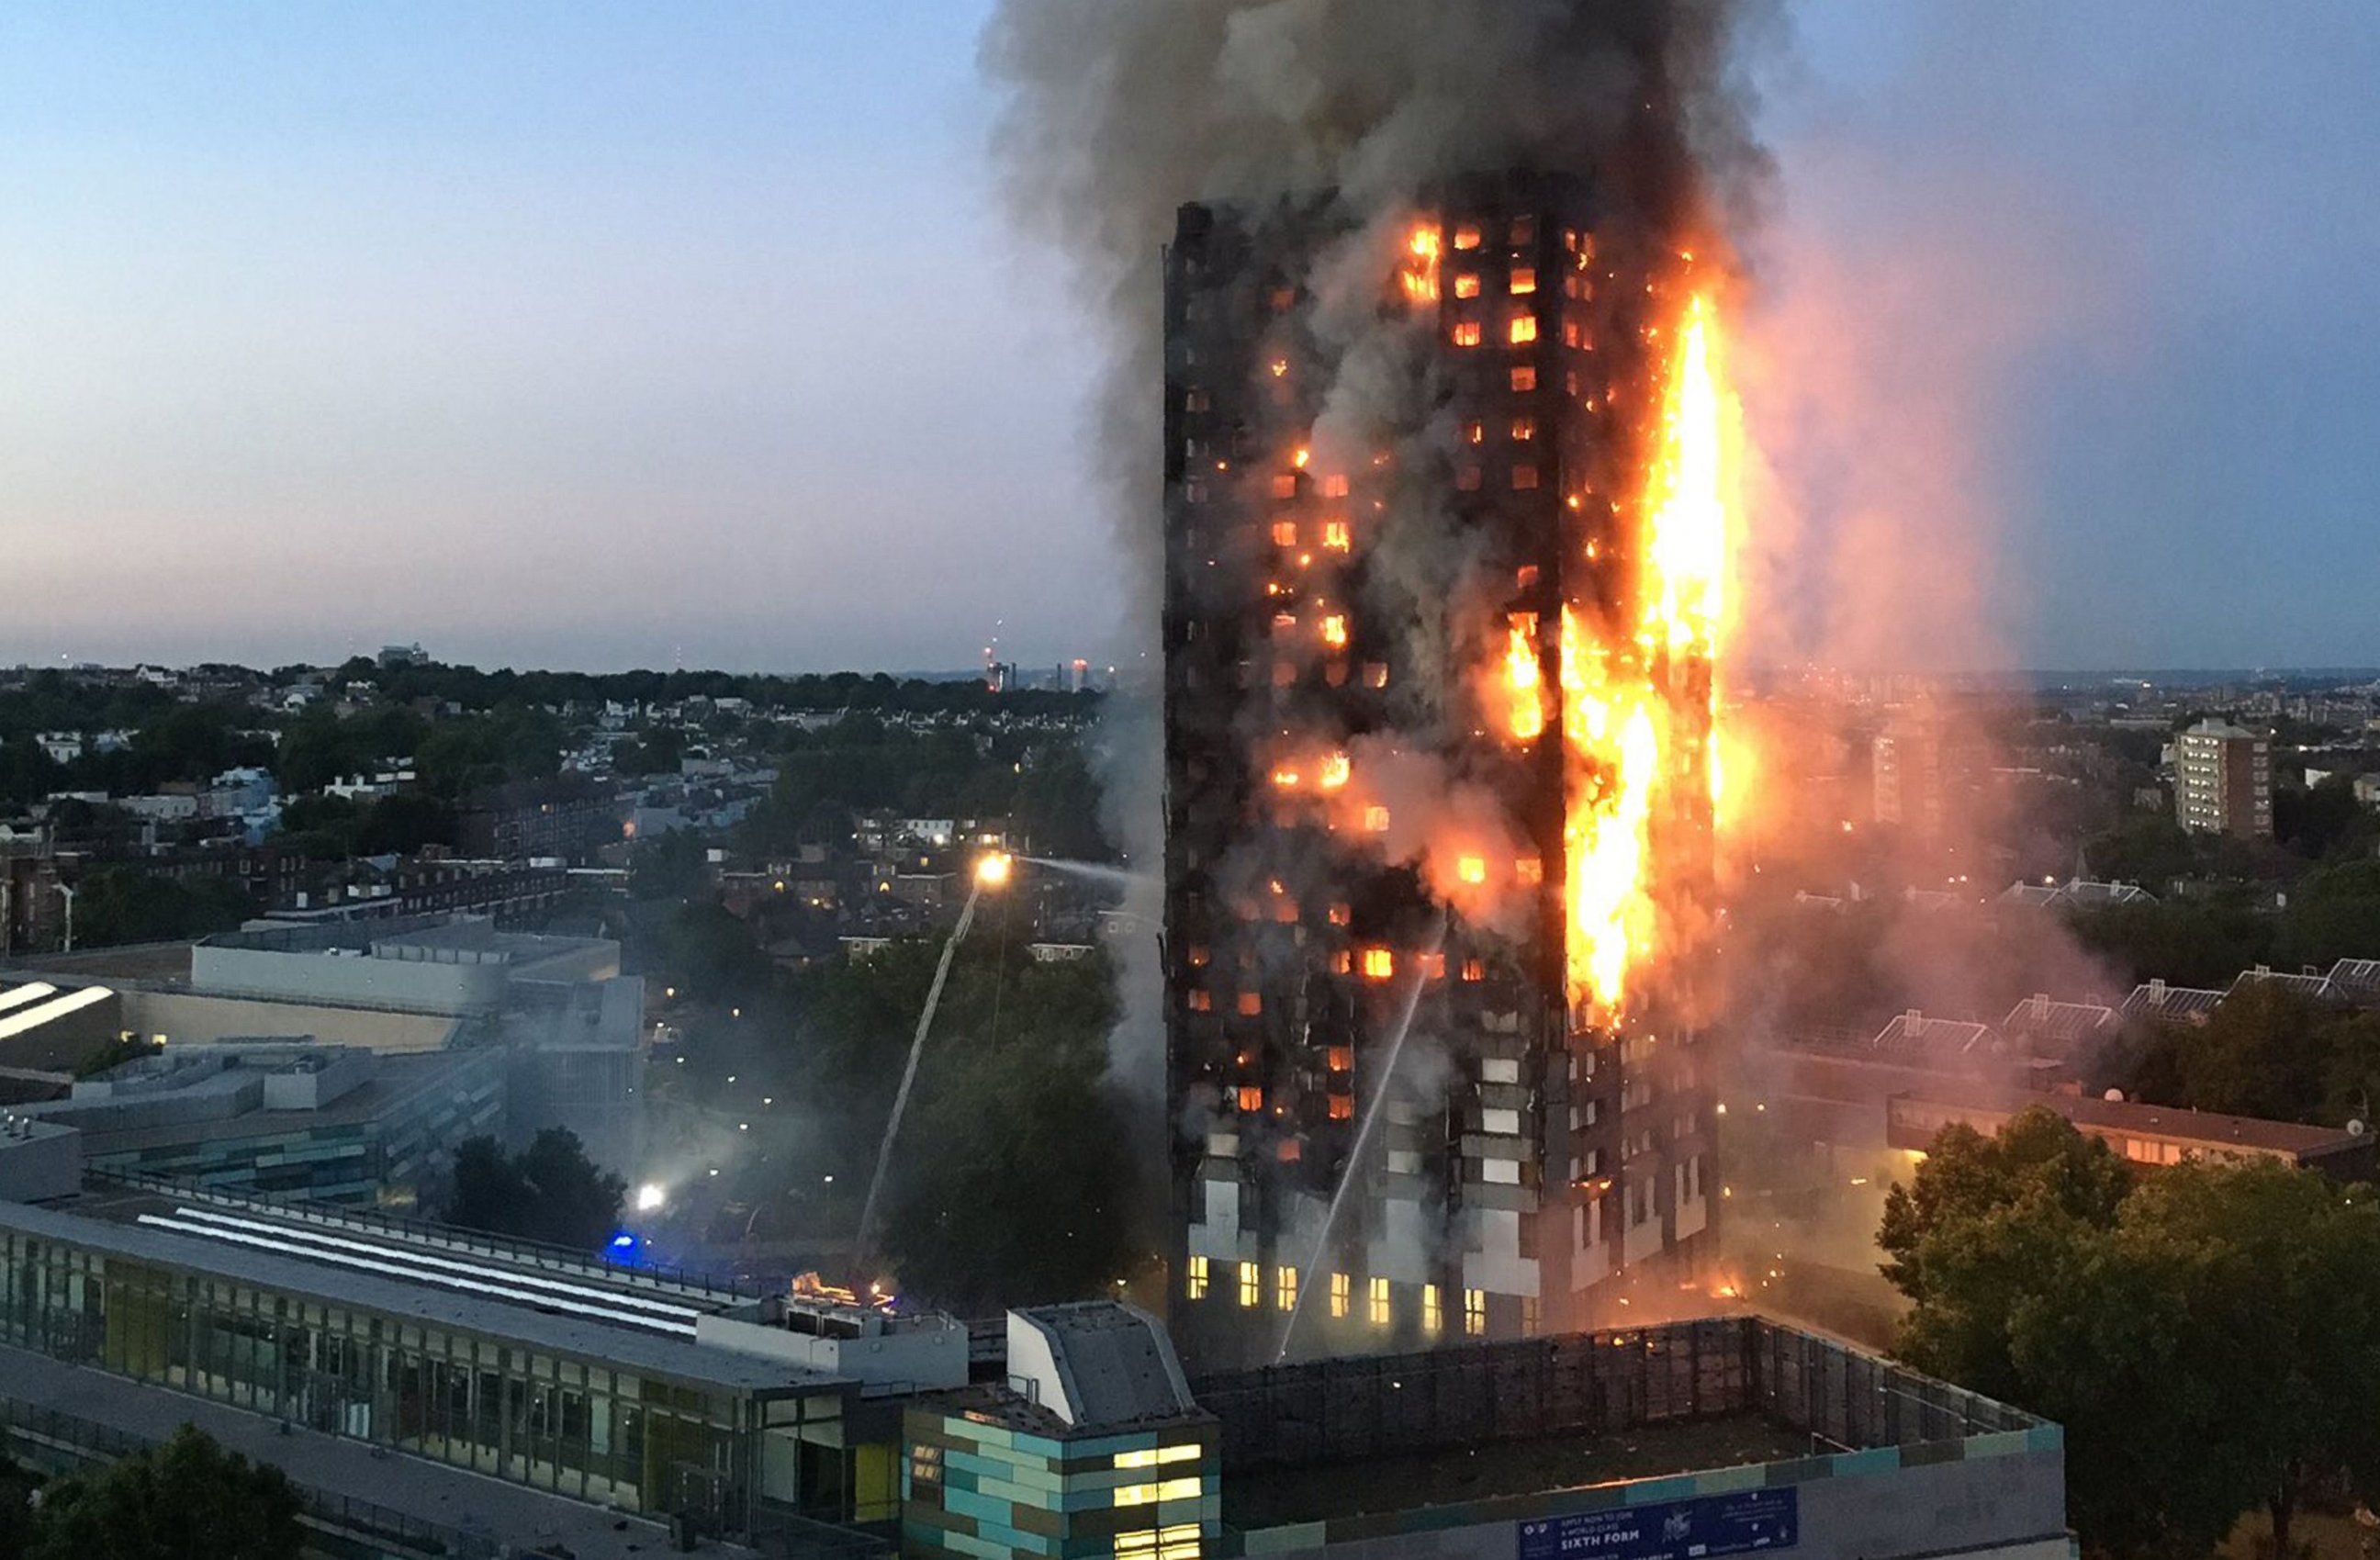 PHOTO:This handout image received by local resident Natalie Oxford early, June 14, 2017, shows flames and smoke coming from a 27-story block of flats after a fire broke out in west London.
